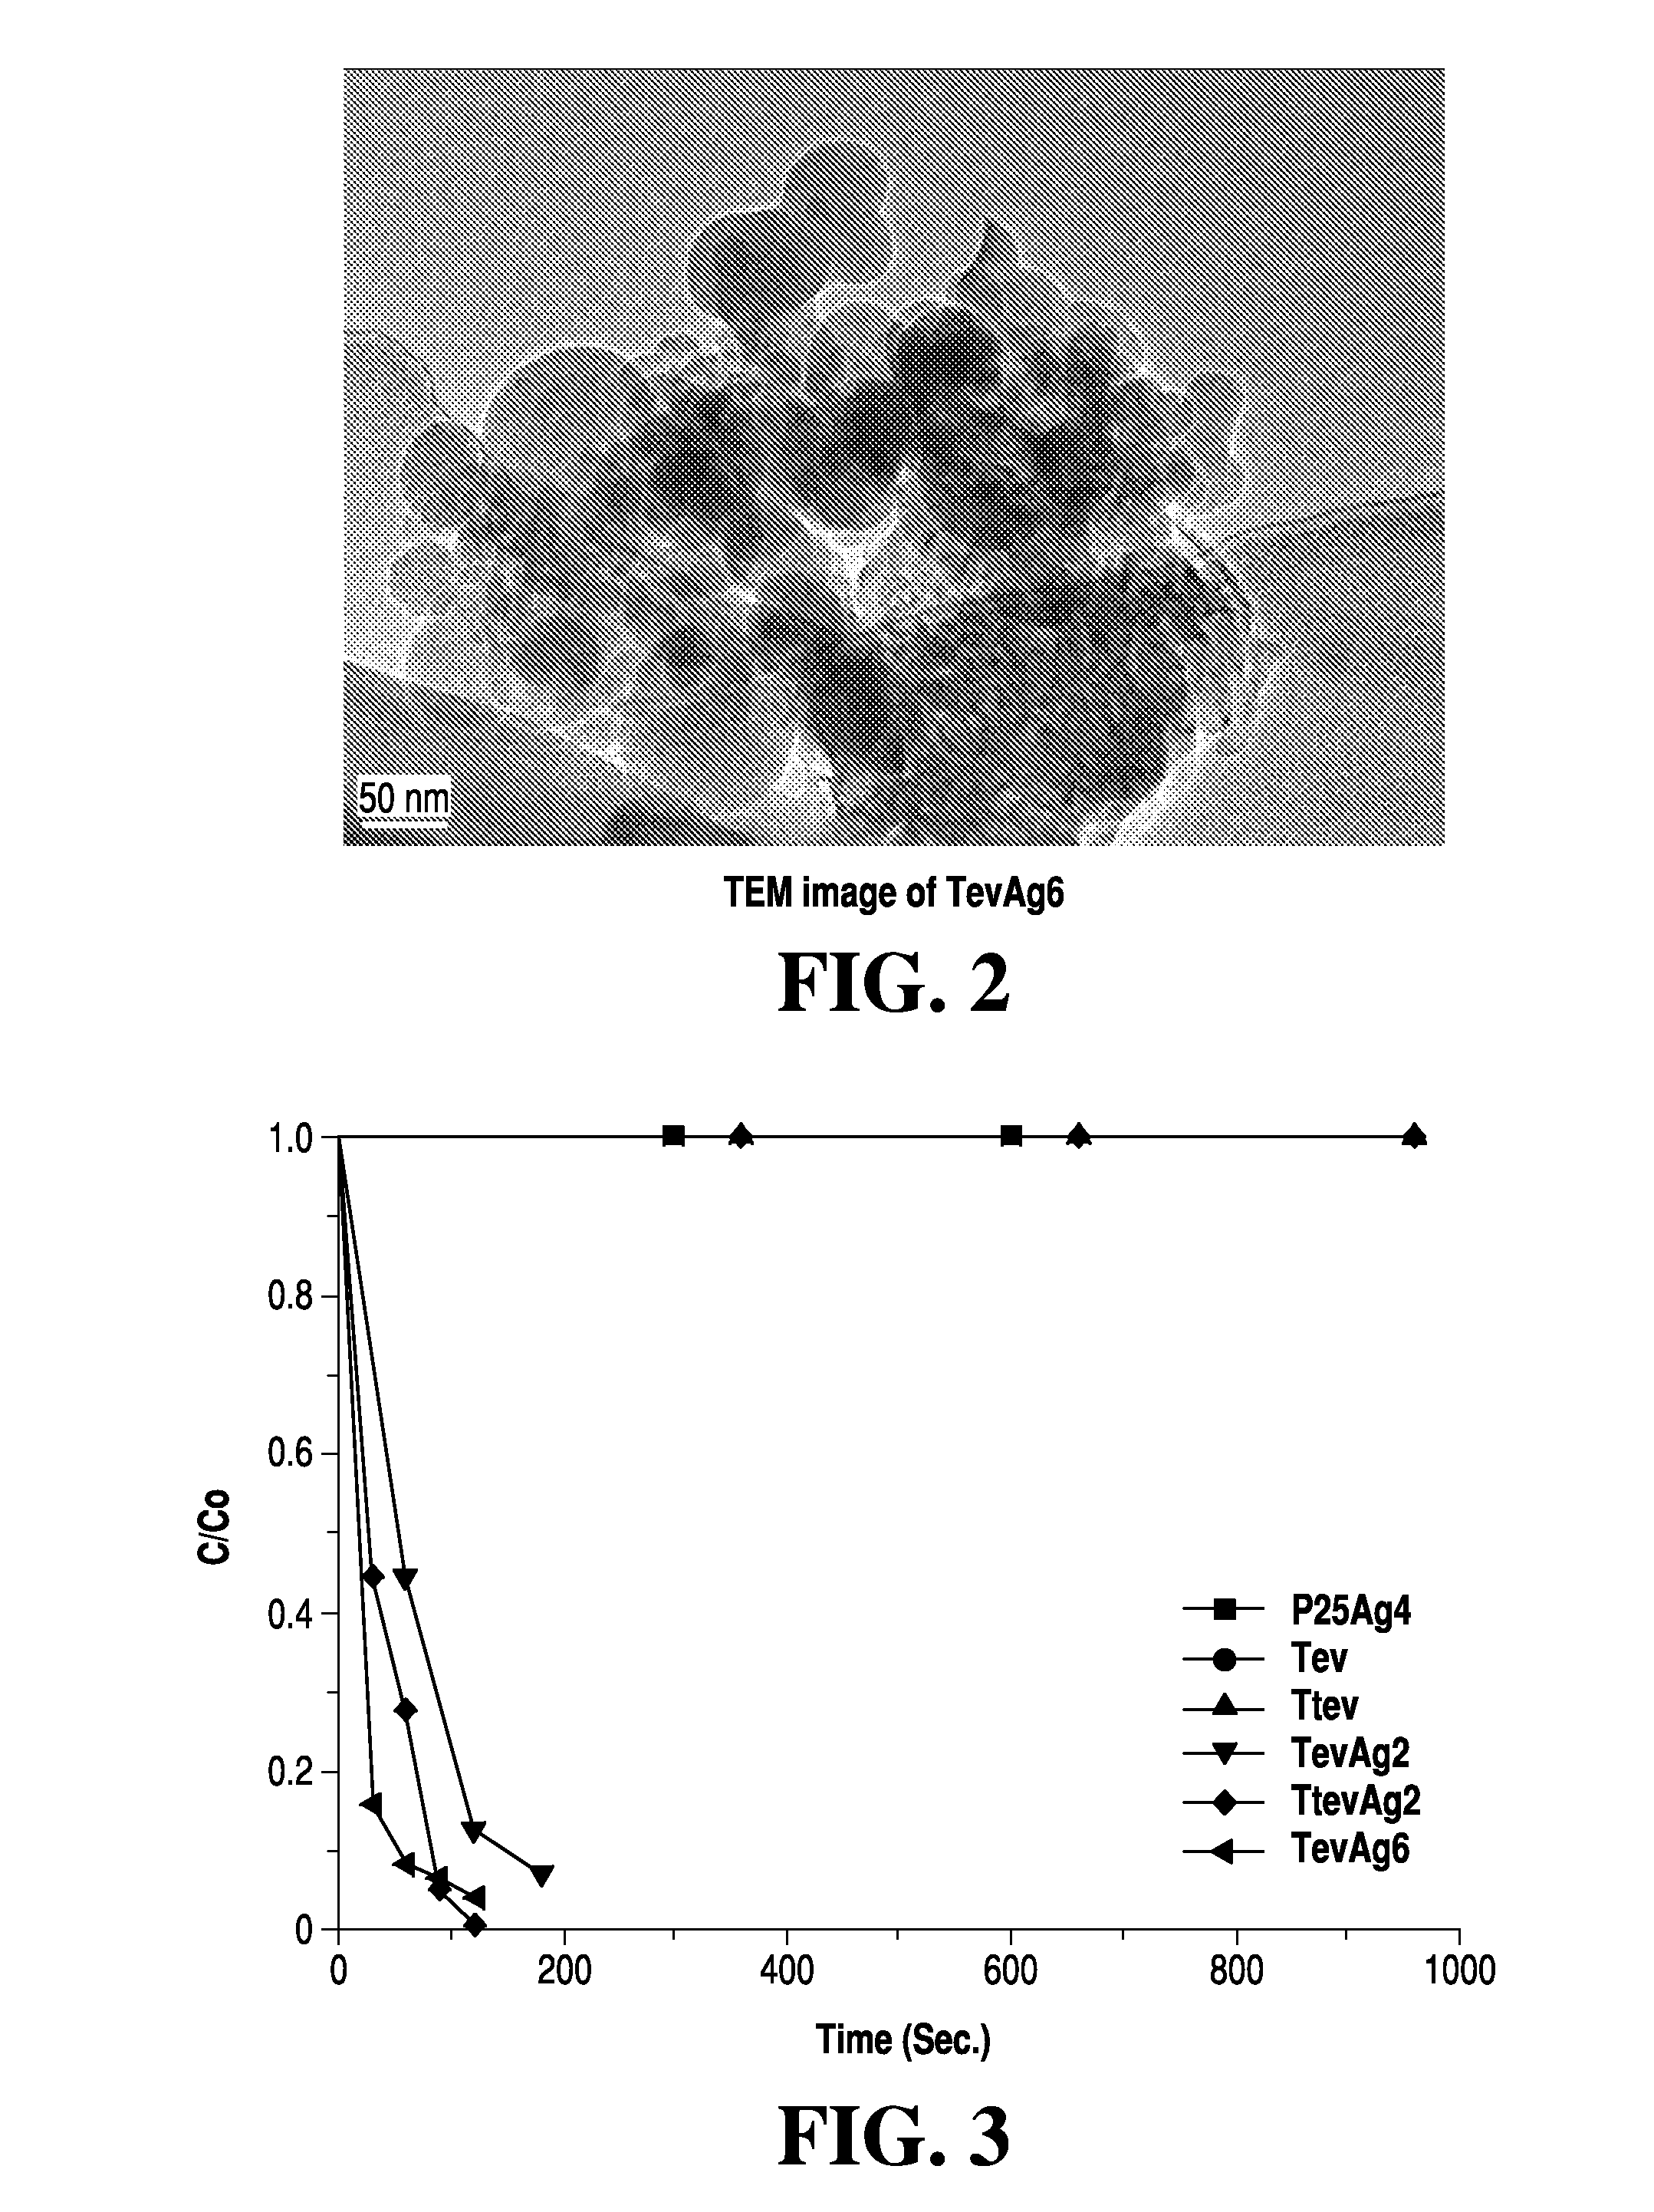 METHOD FOR SYNTHESIZING SILVER NANOPARTICLES ON TiO2 USING HYBRID POLYMERS